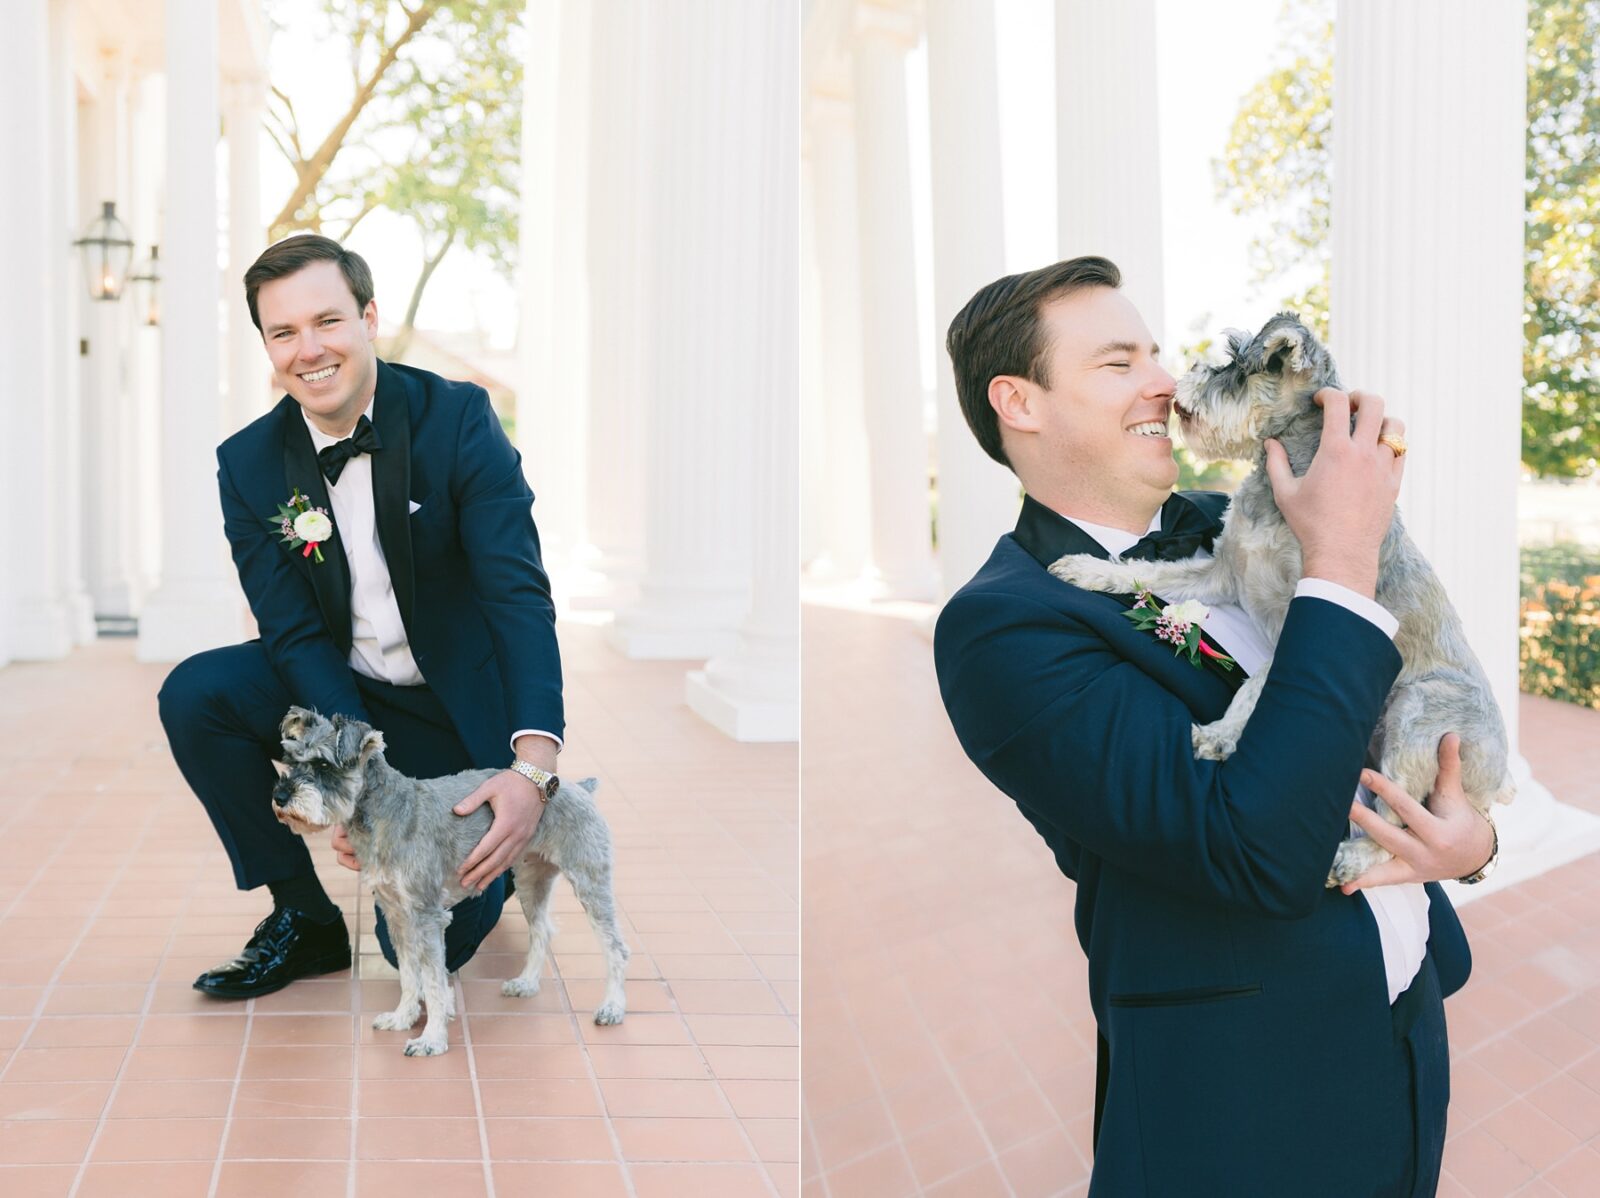 groom with dog, wedding dog, flower girl dog, dogs in weddings, groom portraits with his dog, wedding at Woodbine mansion in round rock texas, wedding photos by Tara Lyons Photography, planning by The event shop